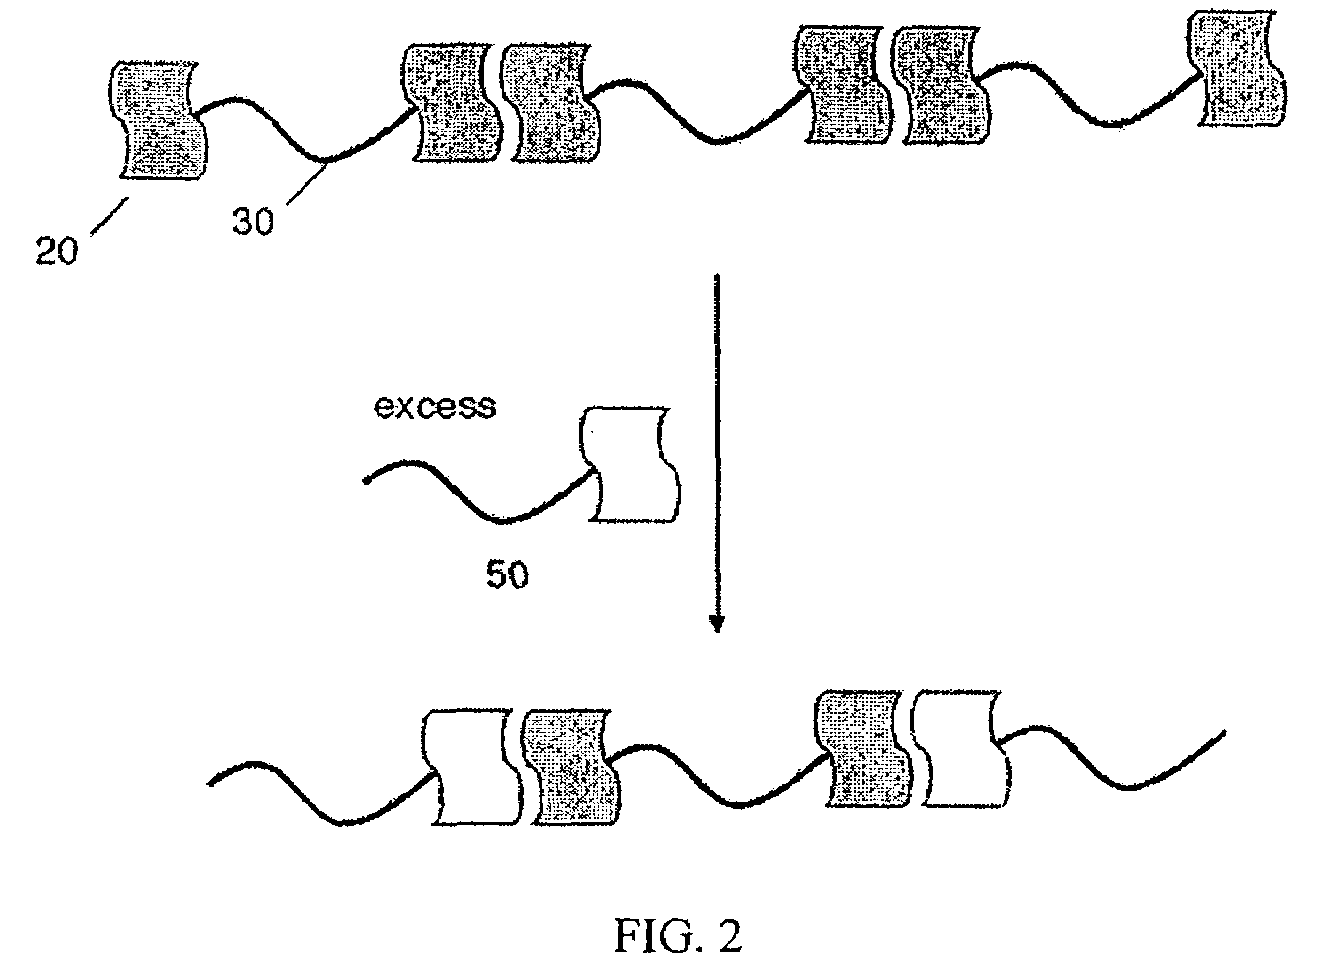 Compositions including polymers aligned via interchain interactions